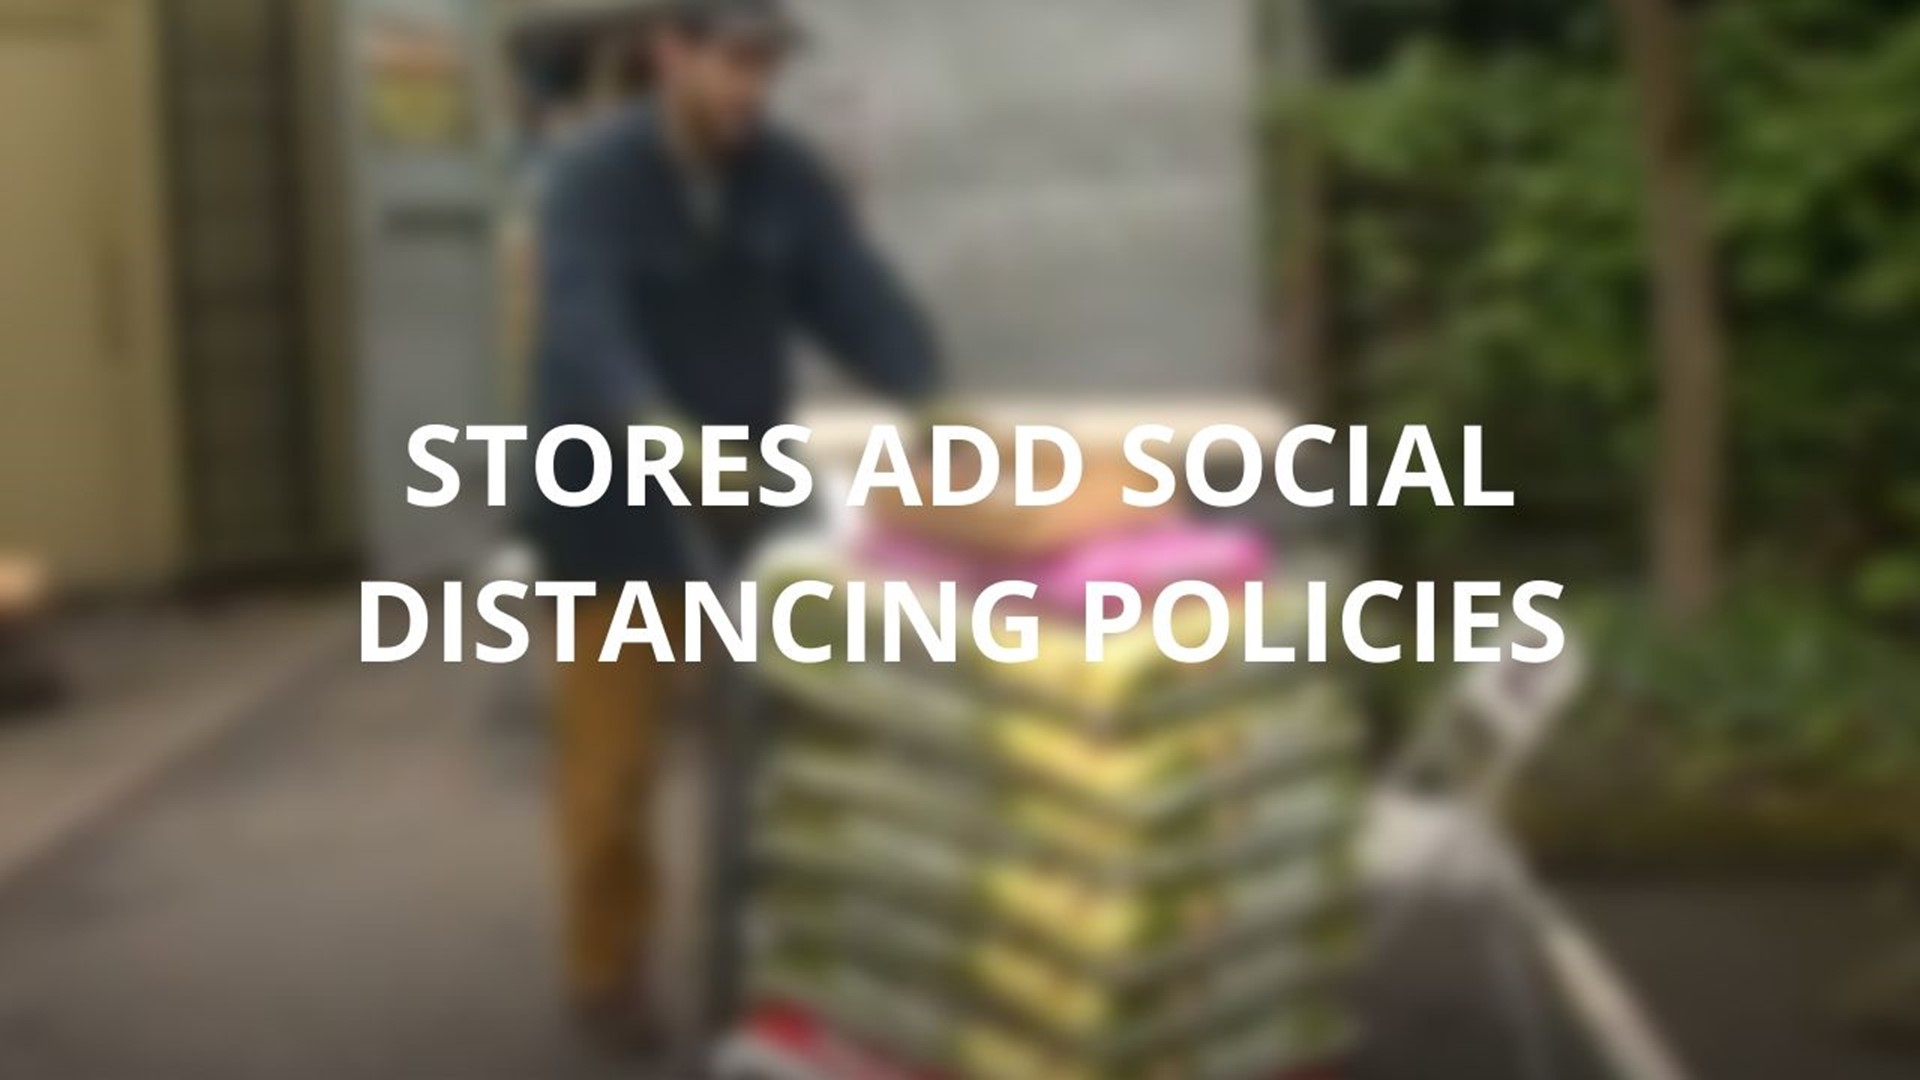 Stores that are still open are adding social distancing policies.